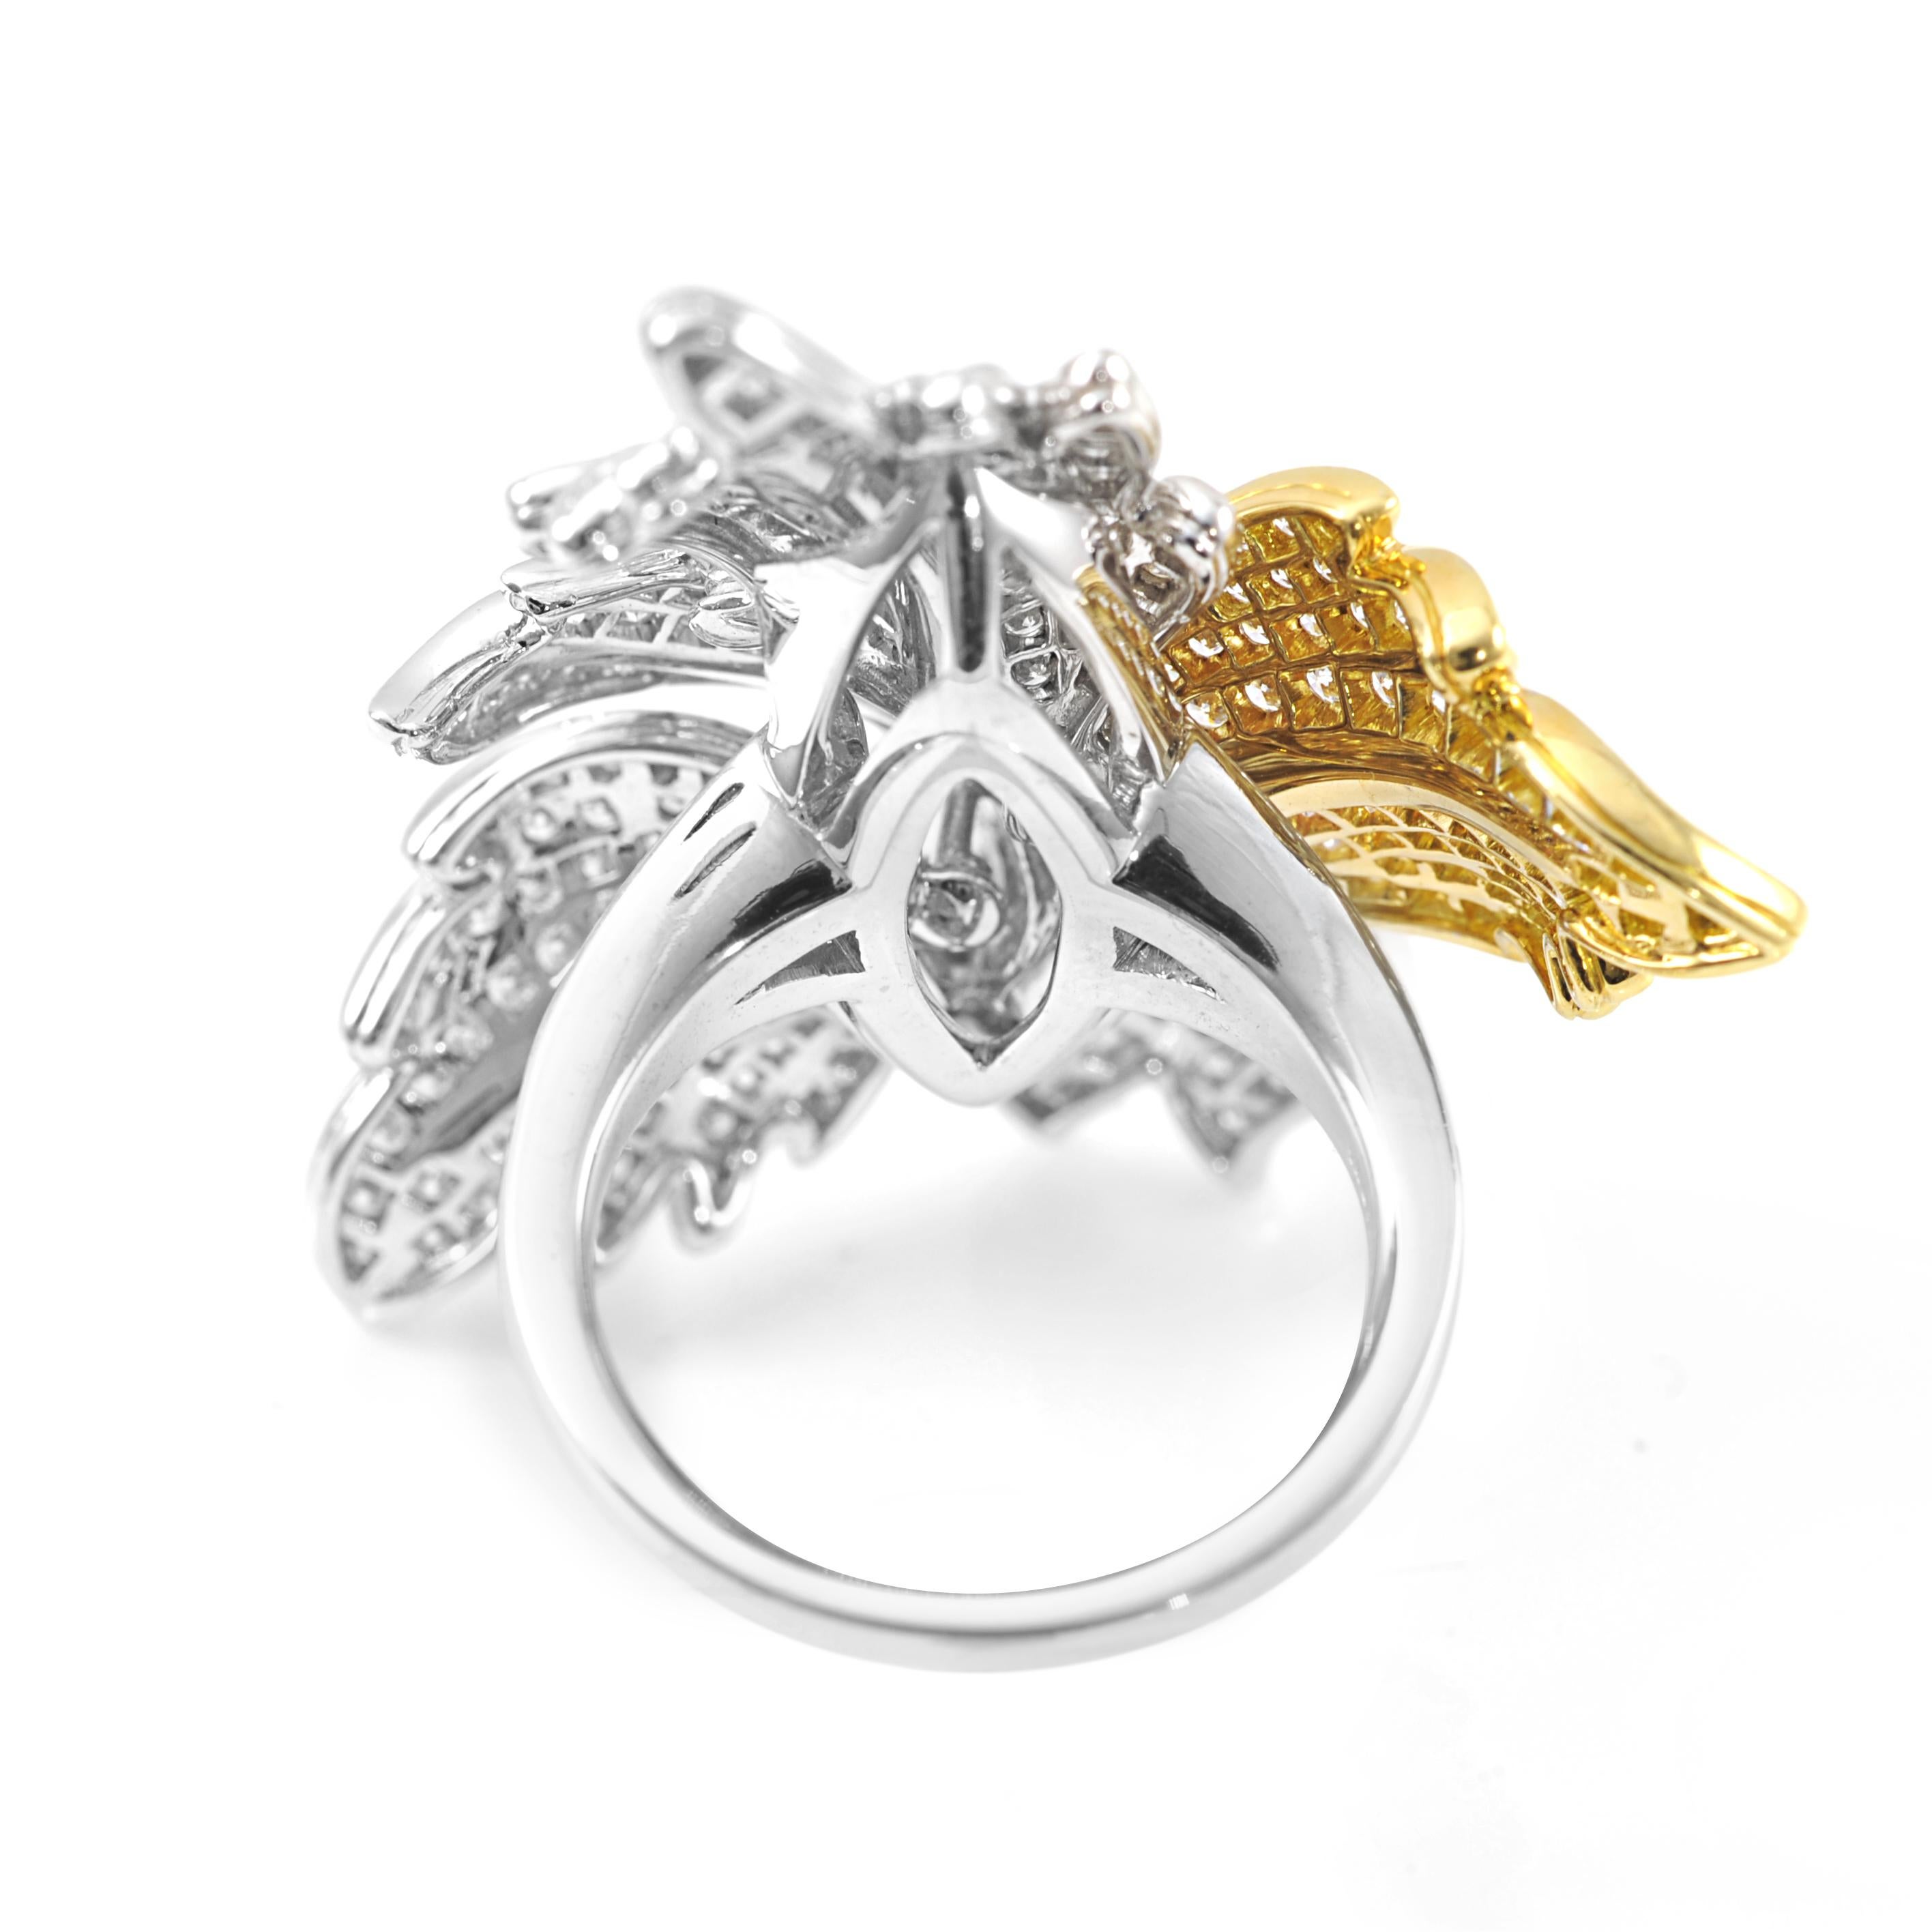 Beautifully sculpted leaves form an original Picchiotti cocktail diamond ring in 18K white and yellow gold.
Round diamonds 3.65 carat
US size 7-1/2
Each Picchiotti item is delivered with the orginal Picchiotti box and Certificate of